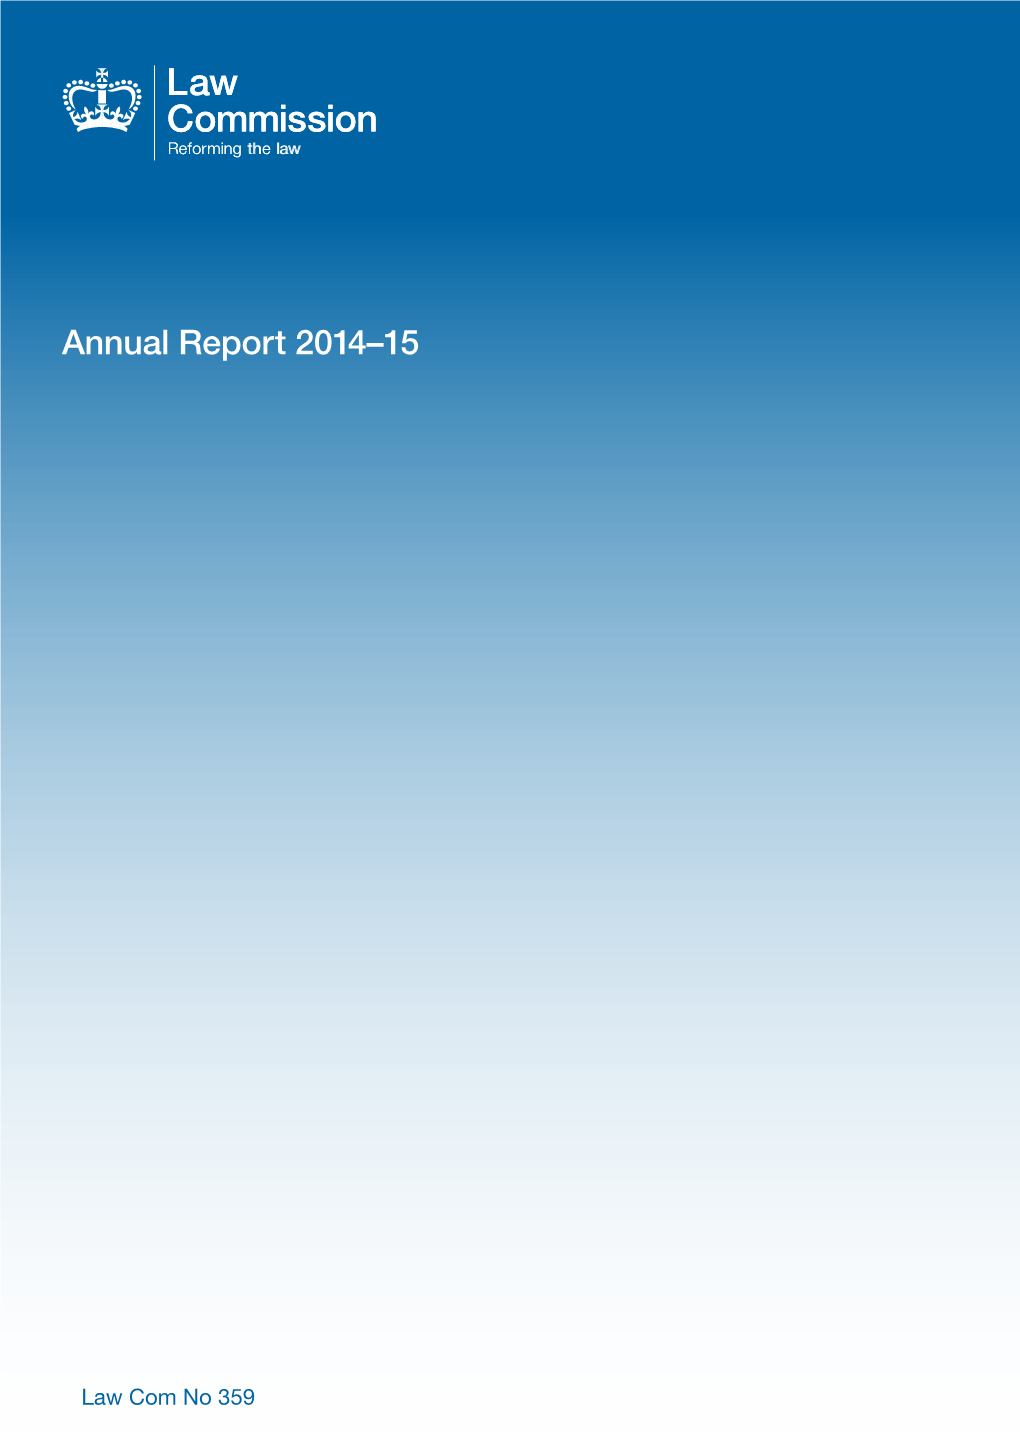 Law Commission Annual Report 2014-2015